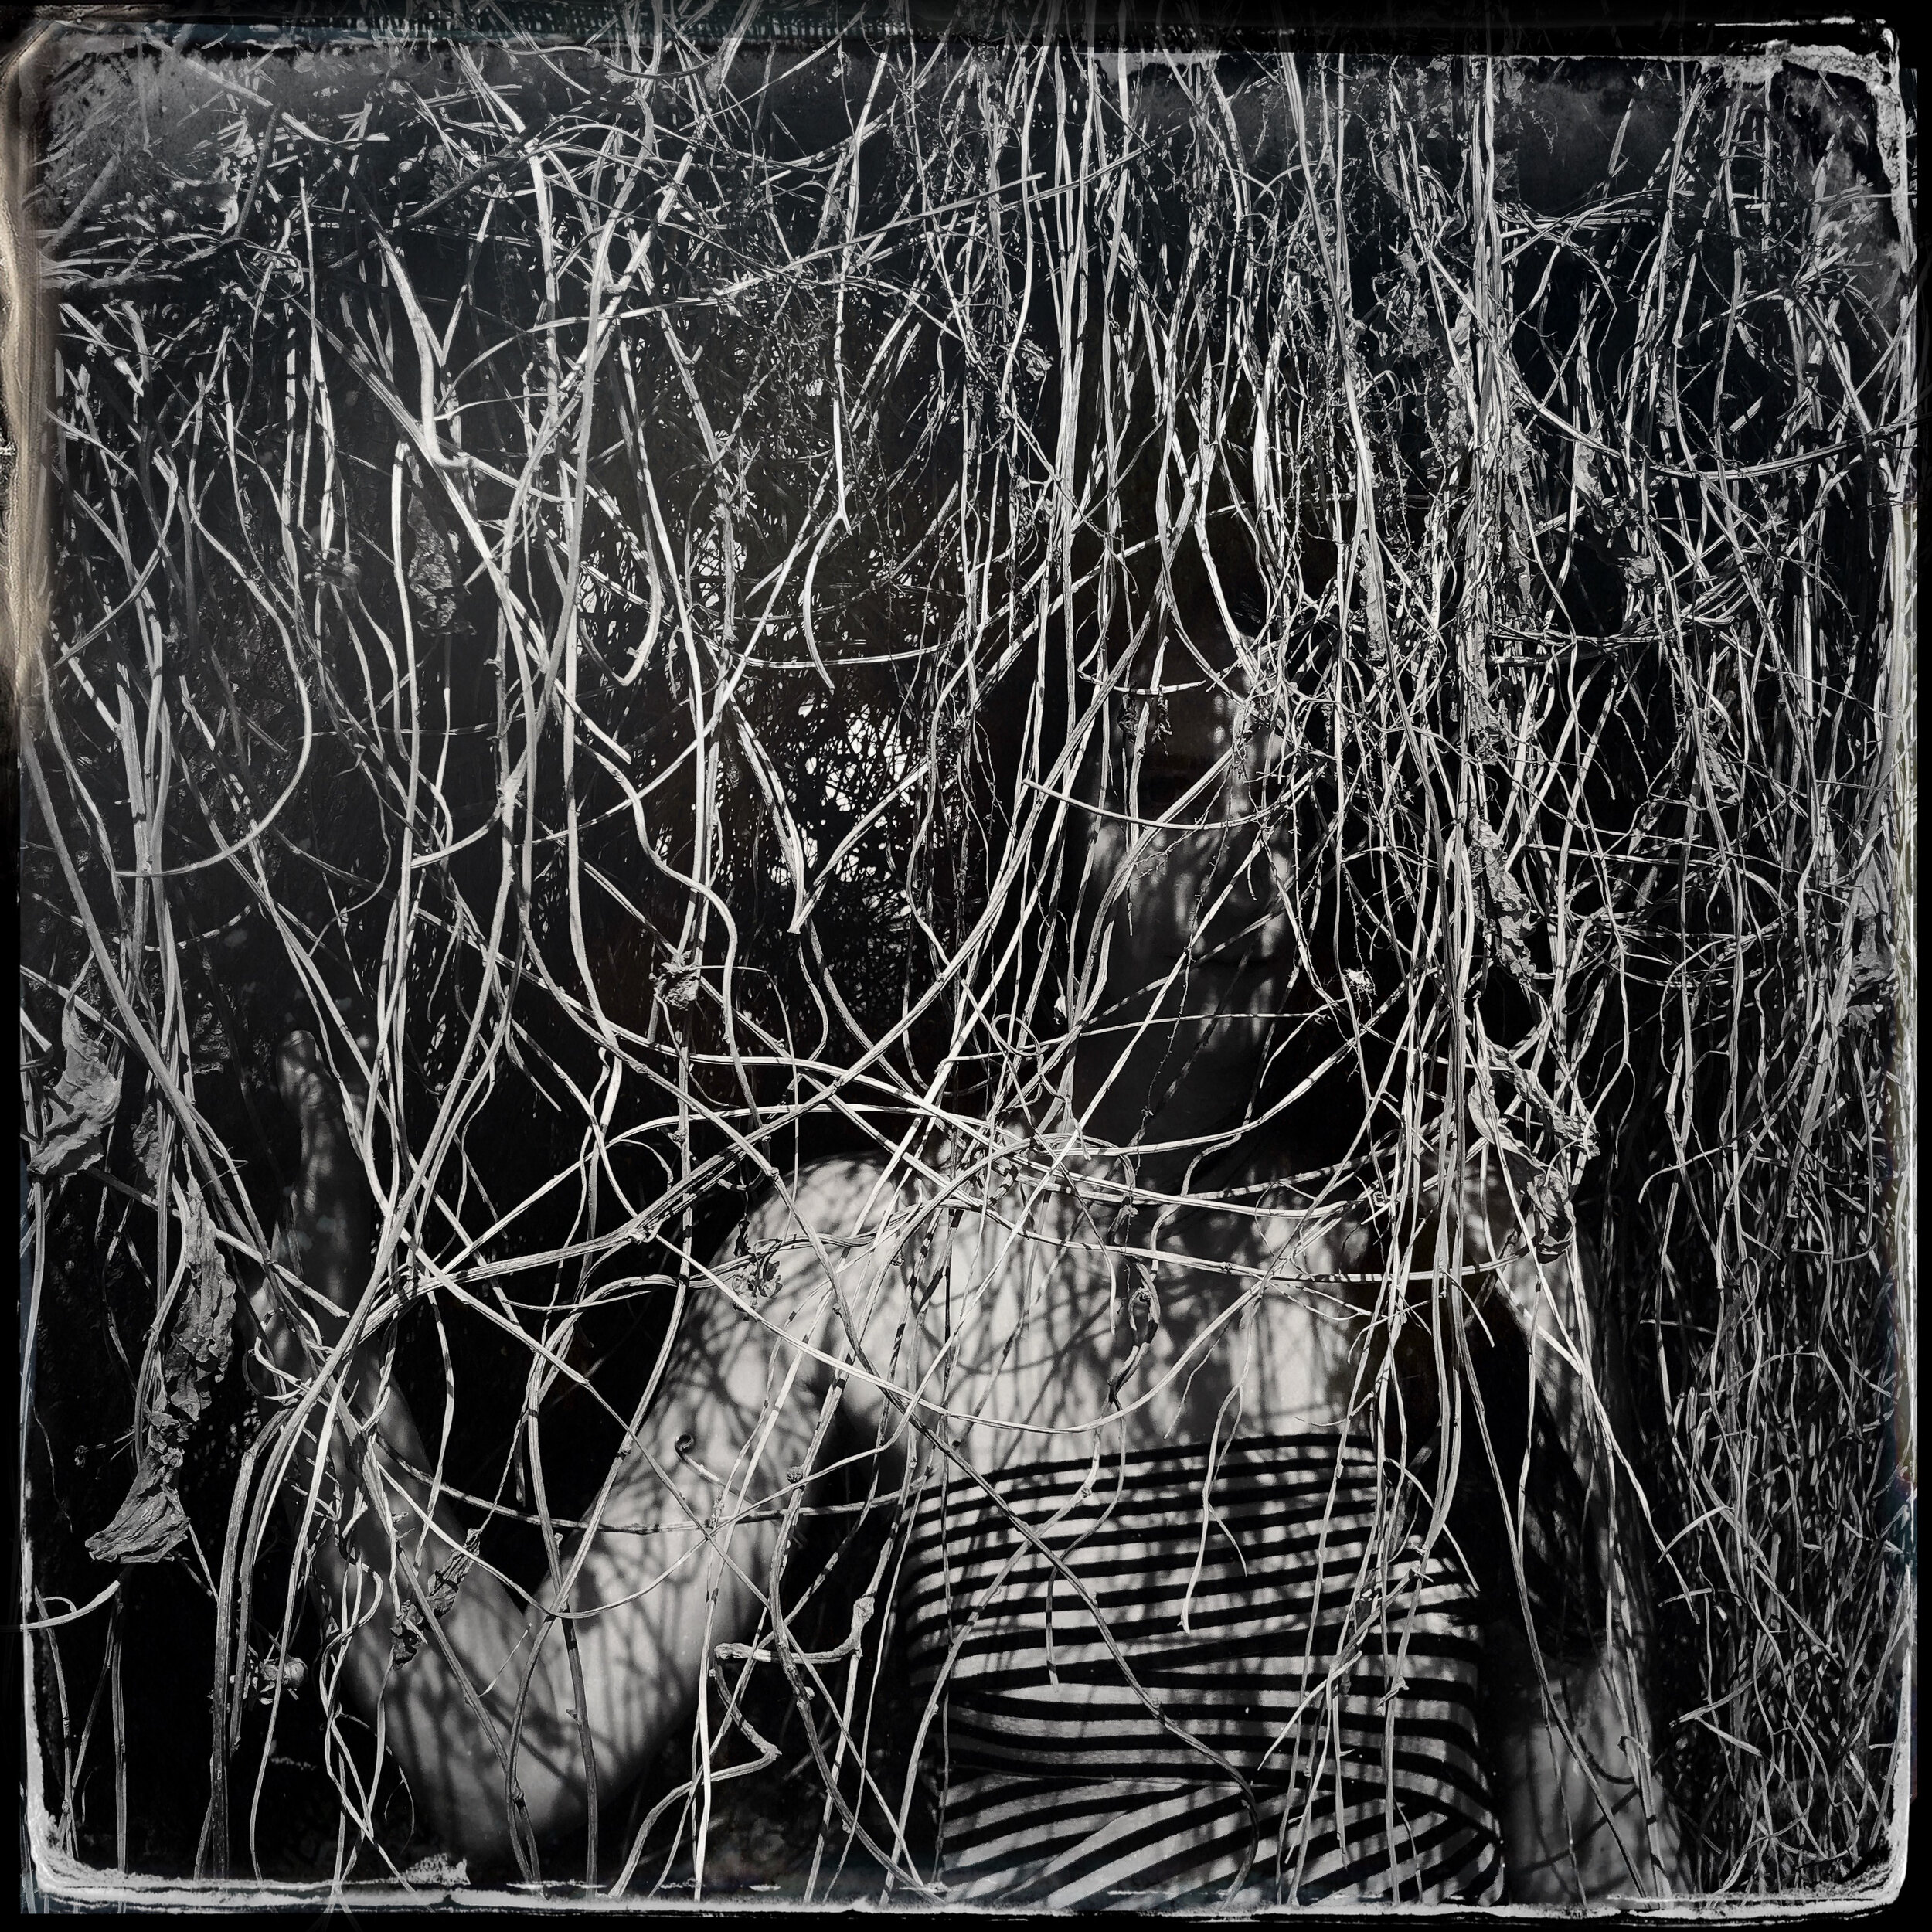 A Bower Is Heard │Jenna underneath the vine veil at Shaxi, Yunnan, China │Collaboration with Douglas Beasley 